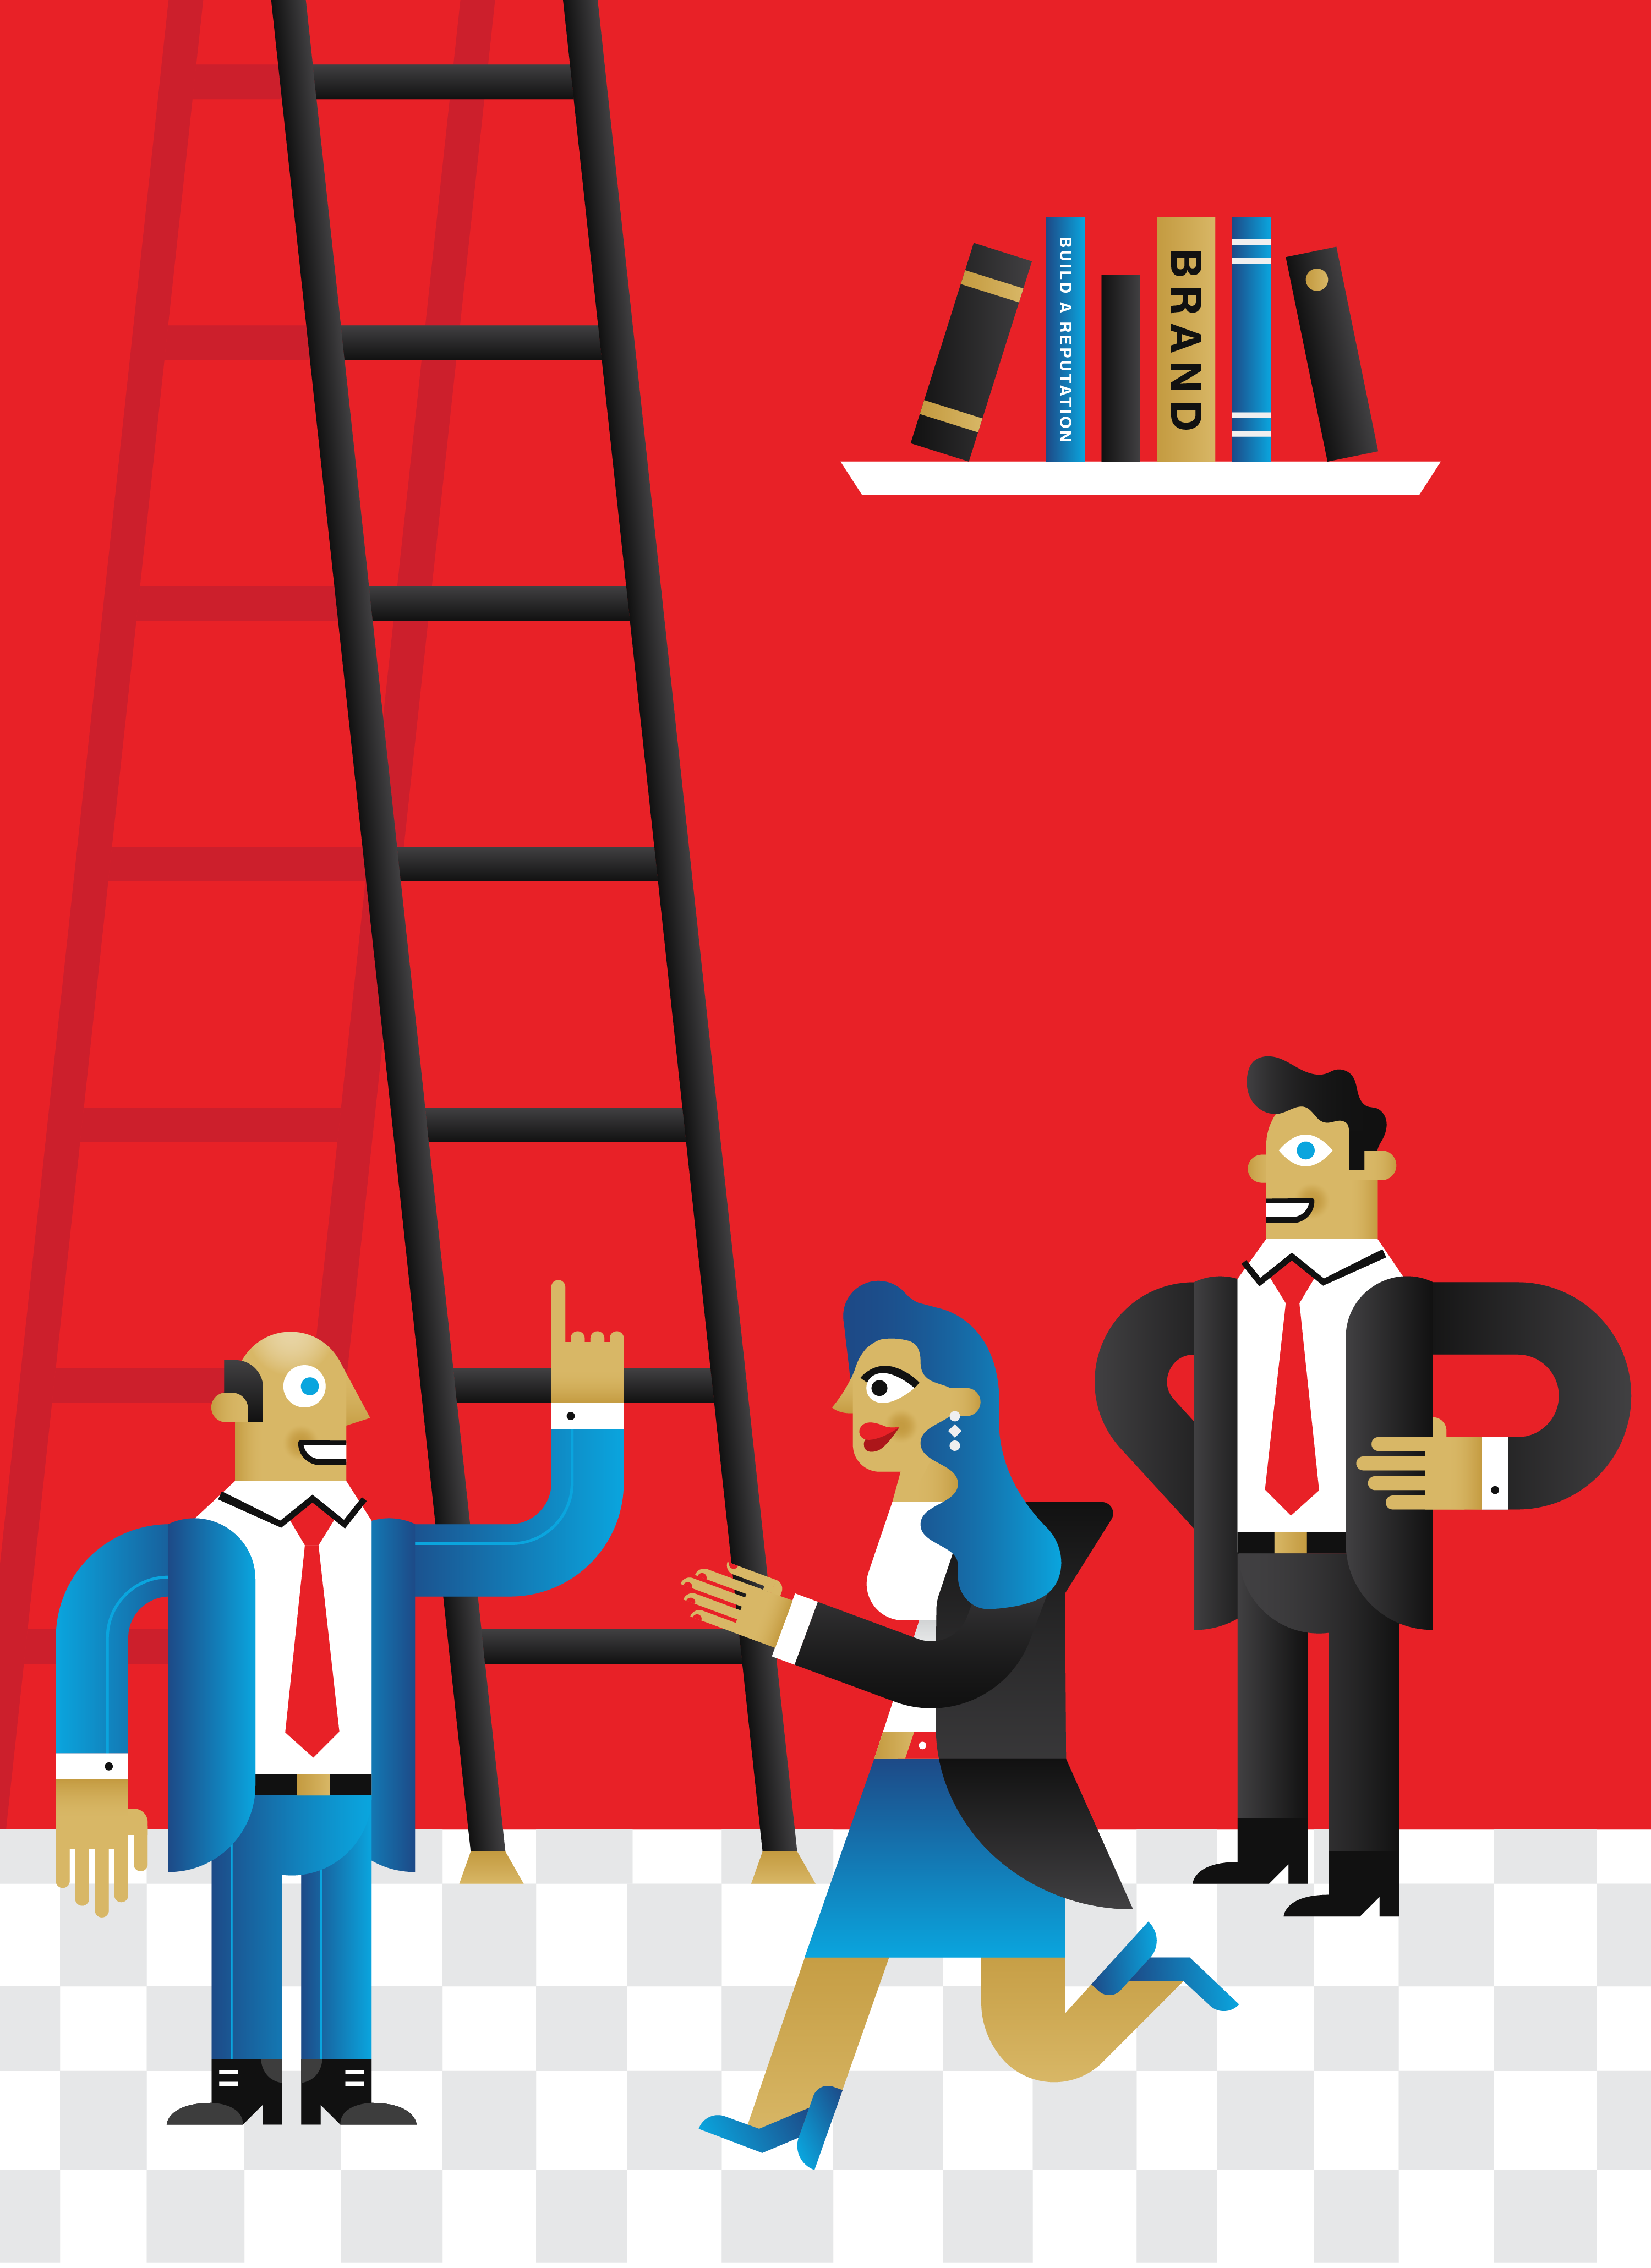 brand-ceo-photo-three-people-with-ladder-01.png